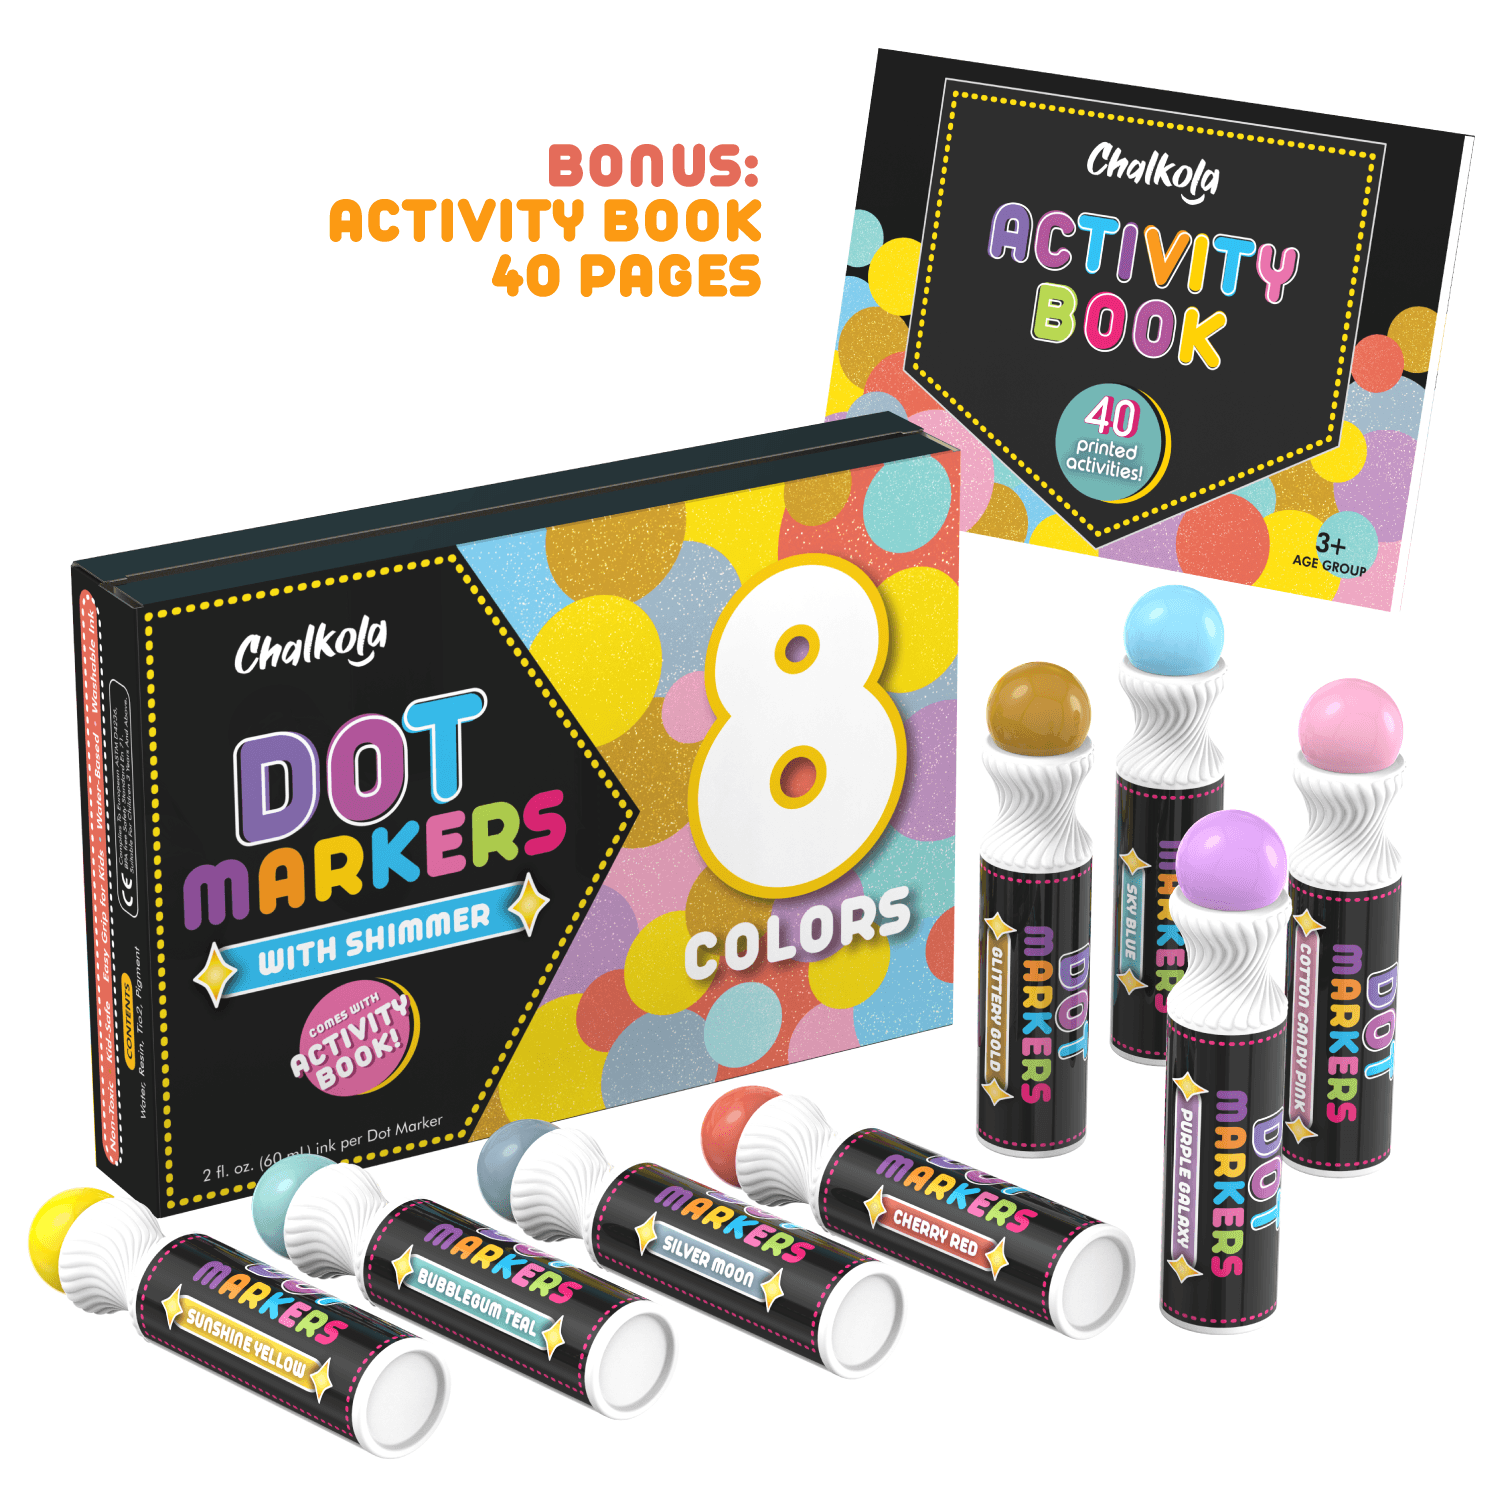 Shuttle Art Dot Markers, 14 Colors Bingo Daubers with 20 Unique Patterns of Dot Book for Toddler Art Activities, Non-Toxic Washable Coloring Markers